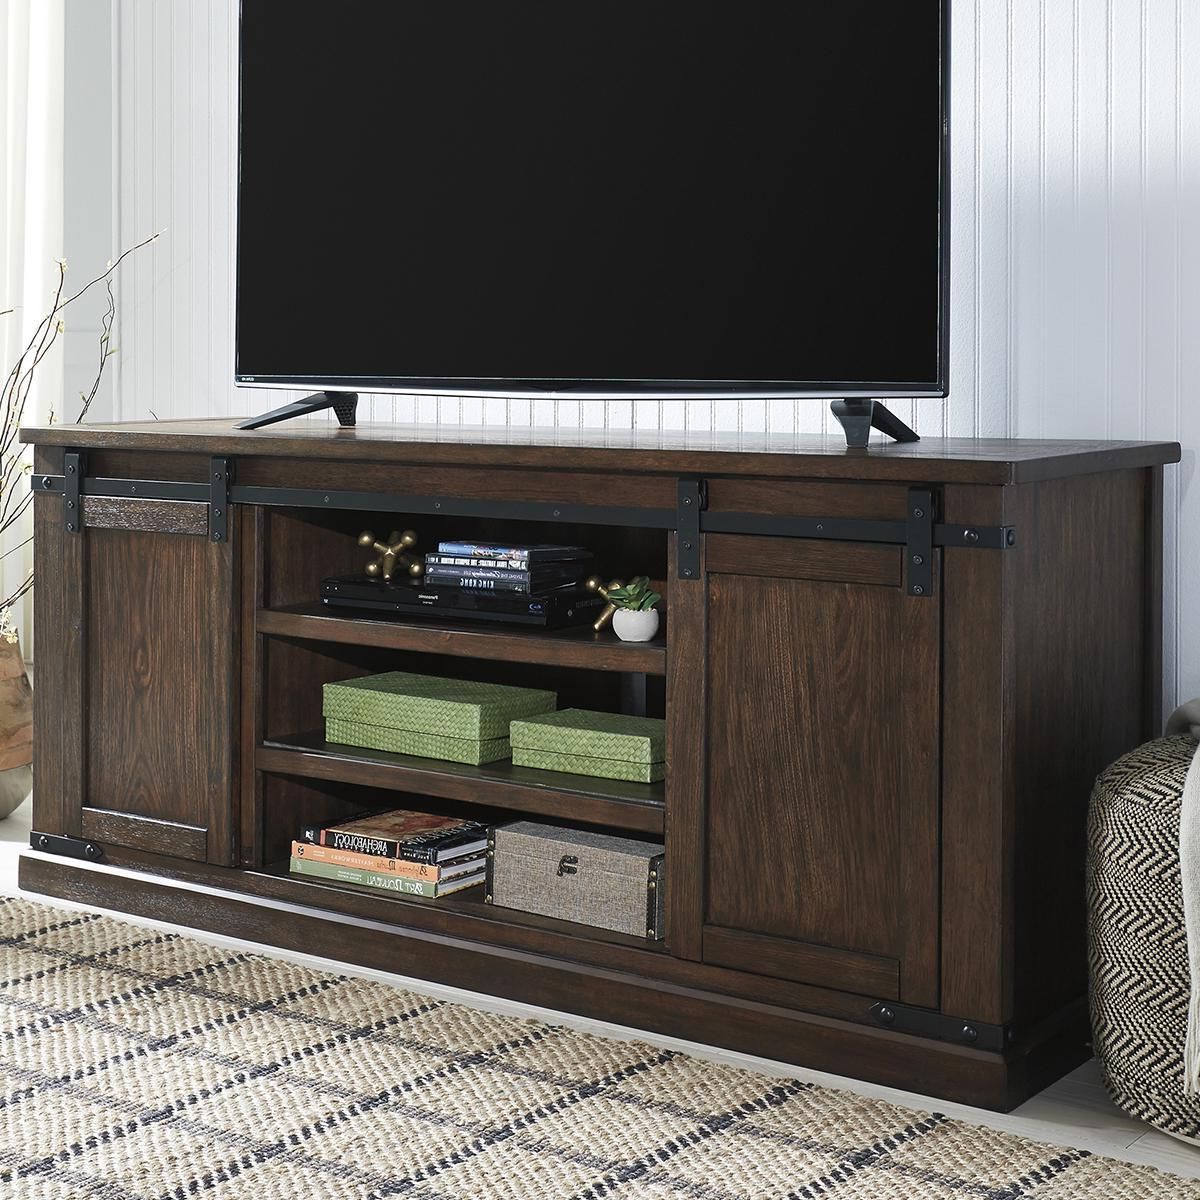 At Home Budmore Extra Large Tv Stand In Rustic Brown Within Chromium Extra Wide Tv Unit Stands (Gallery 1 of 20)